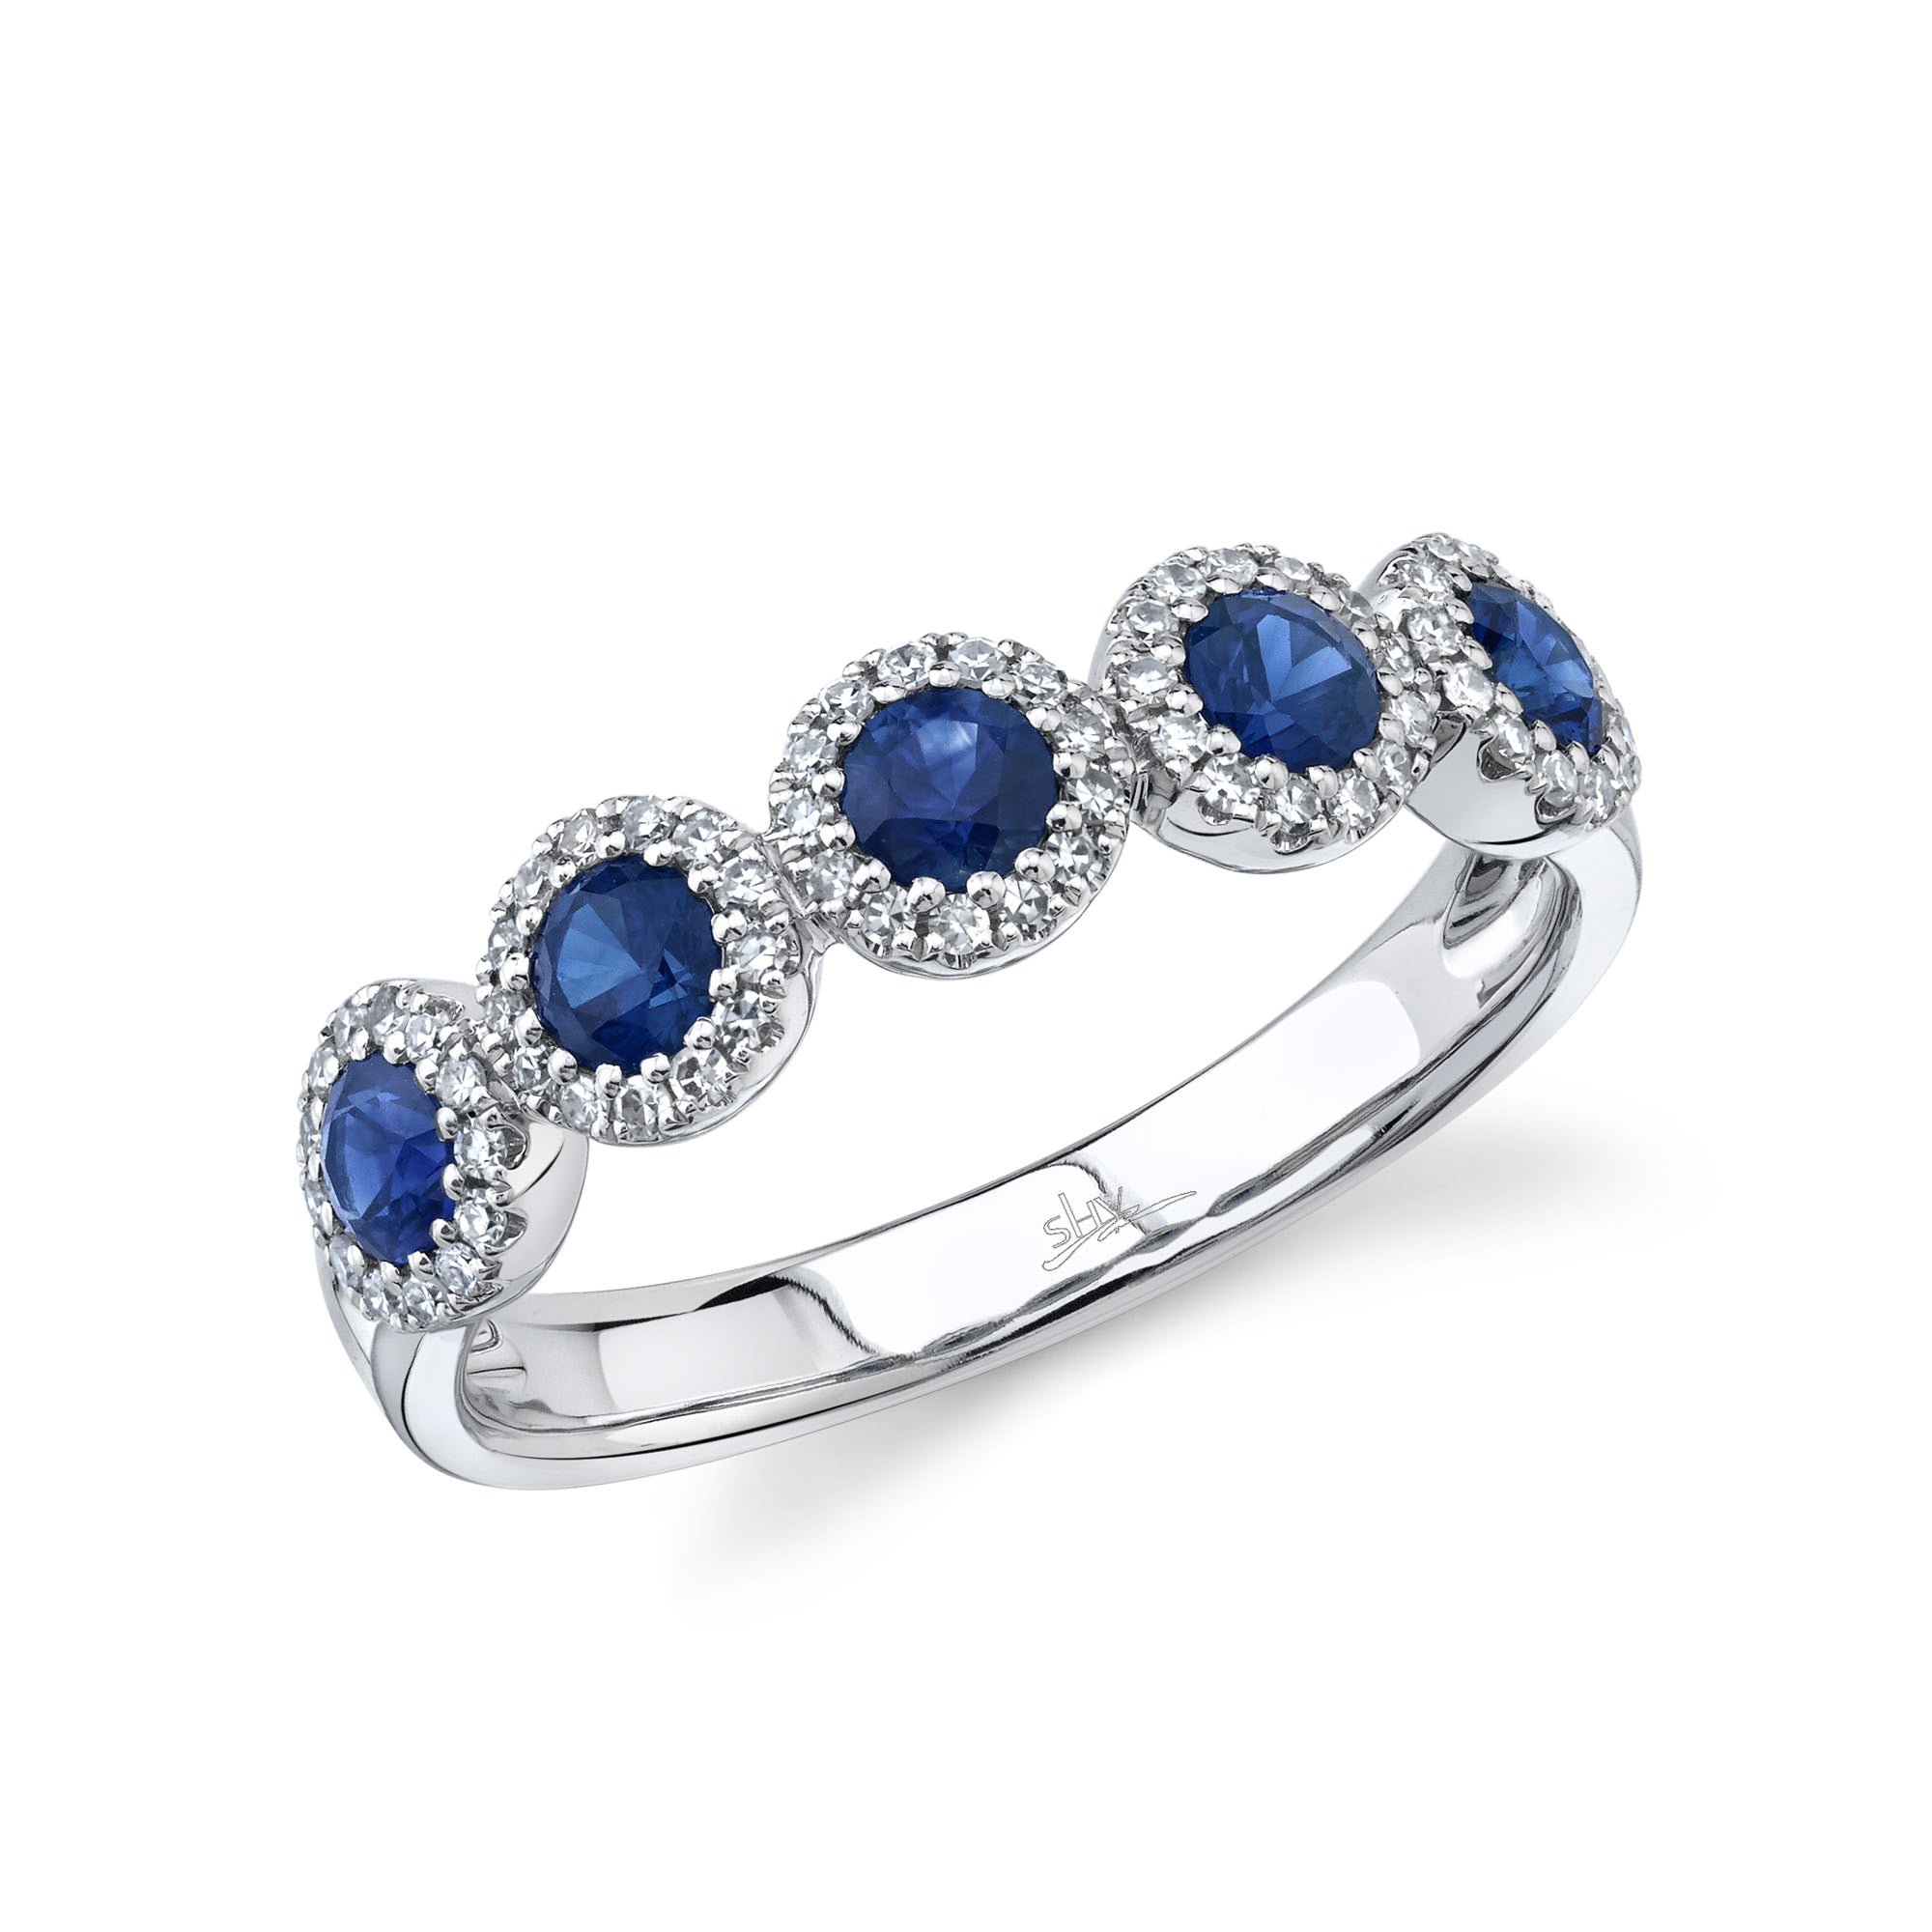 White Gold Pave Diamond Sapphire Ring Rings Gift Giving